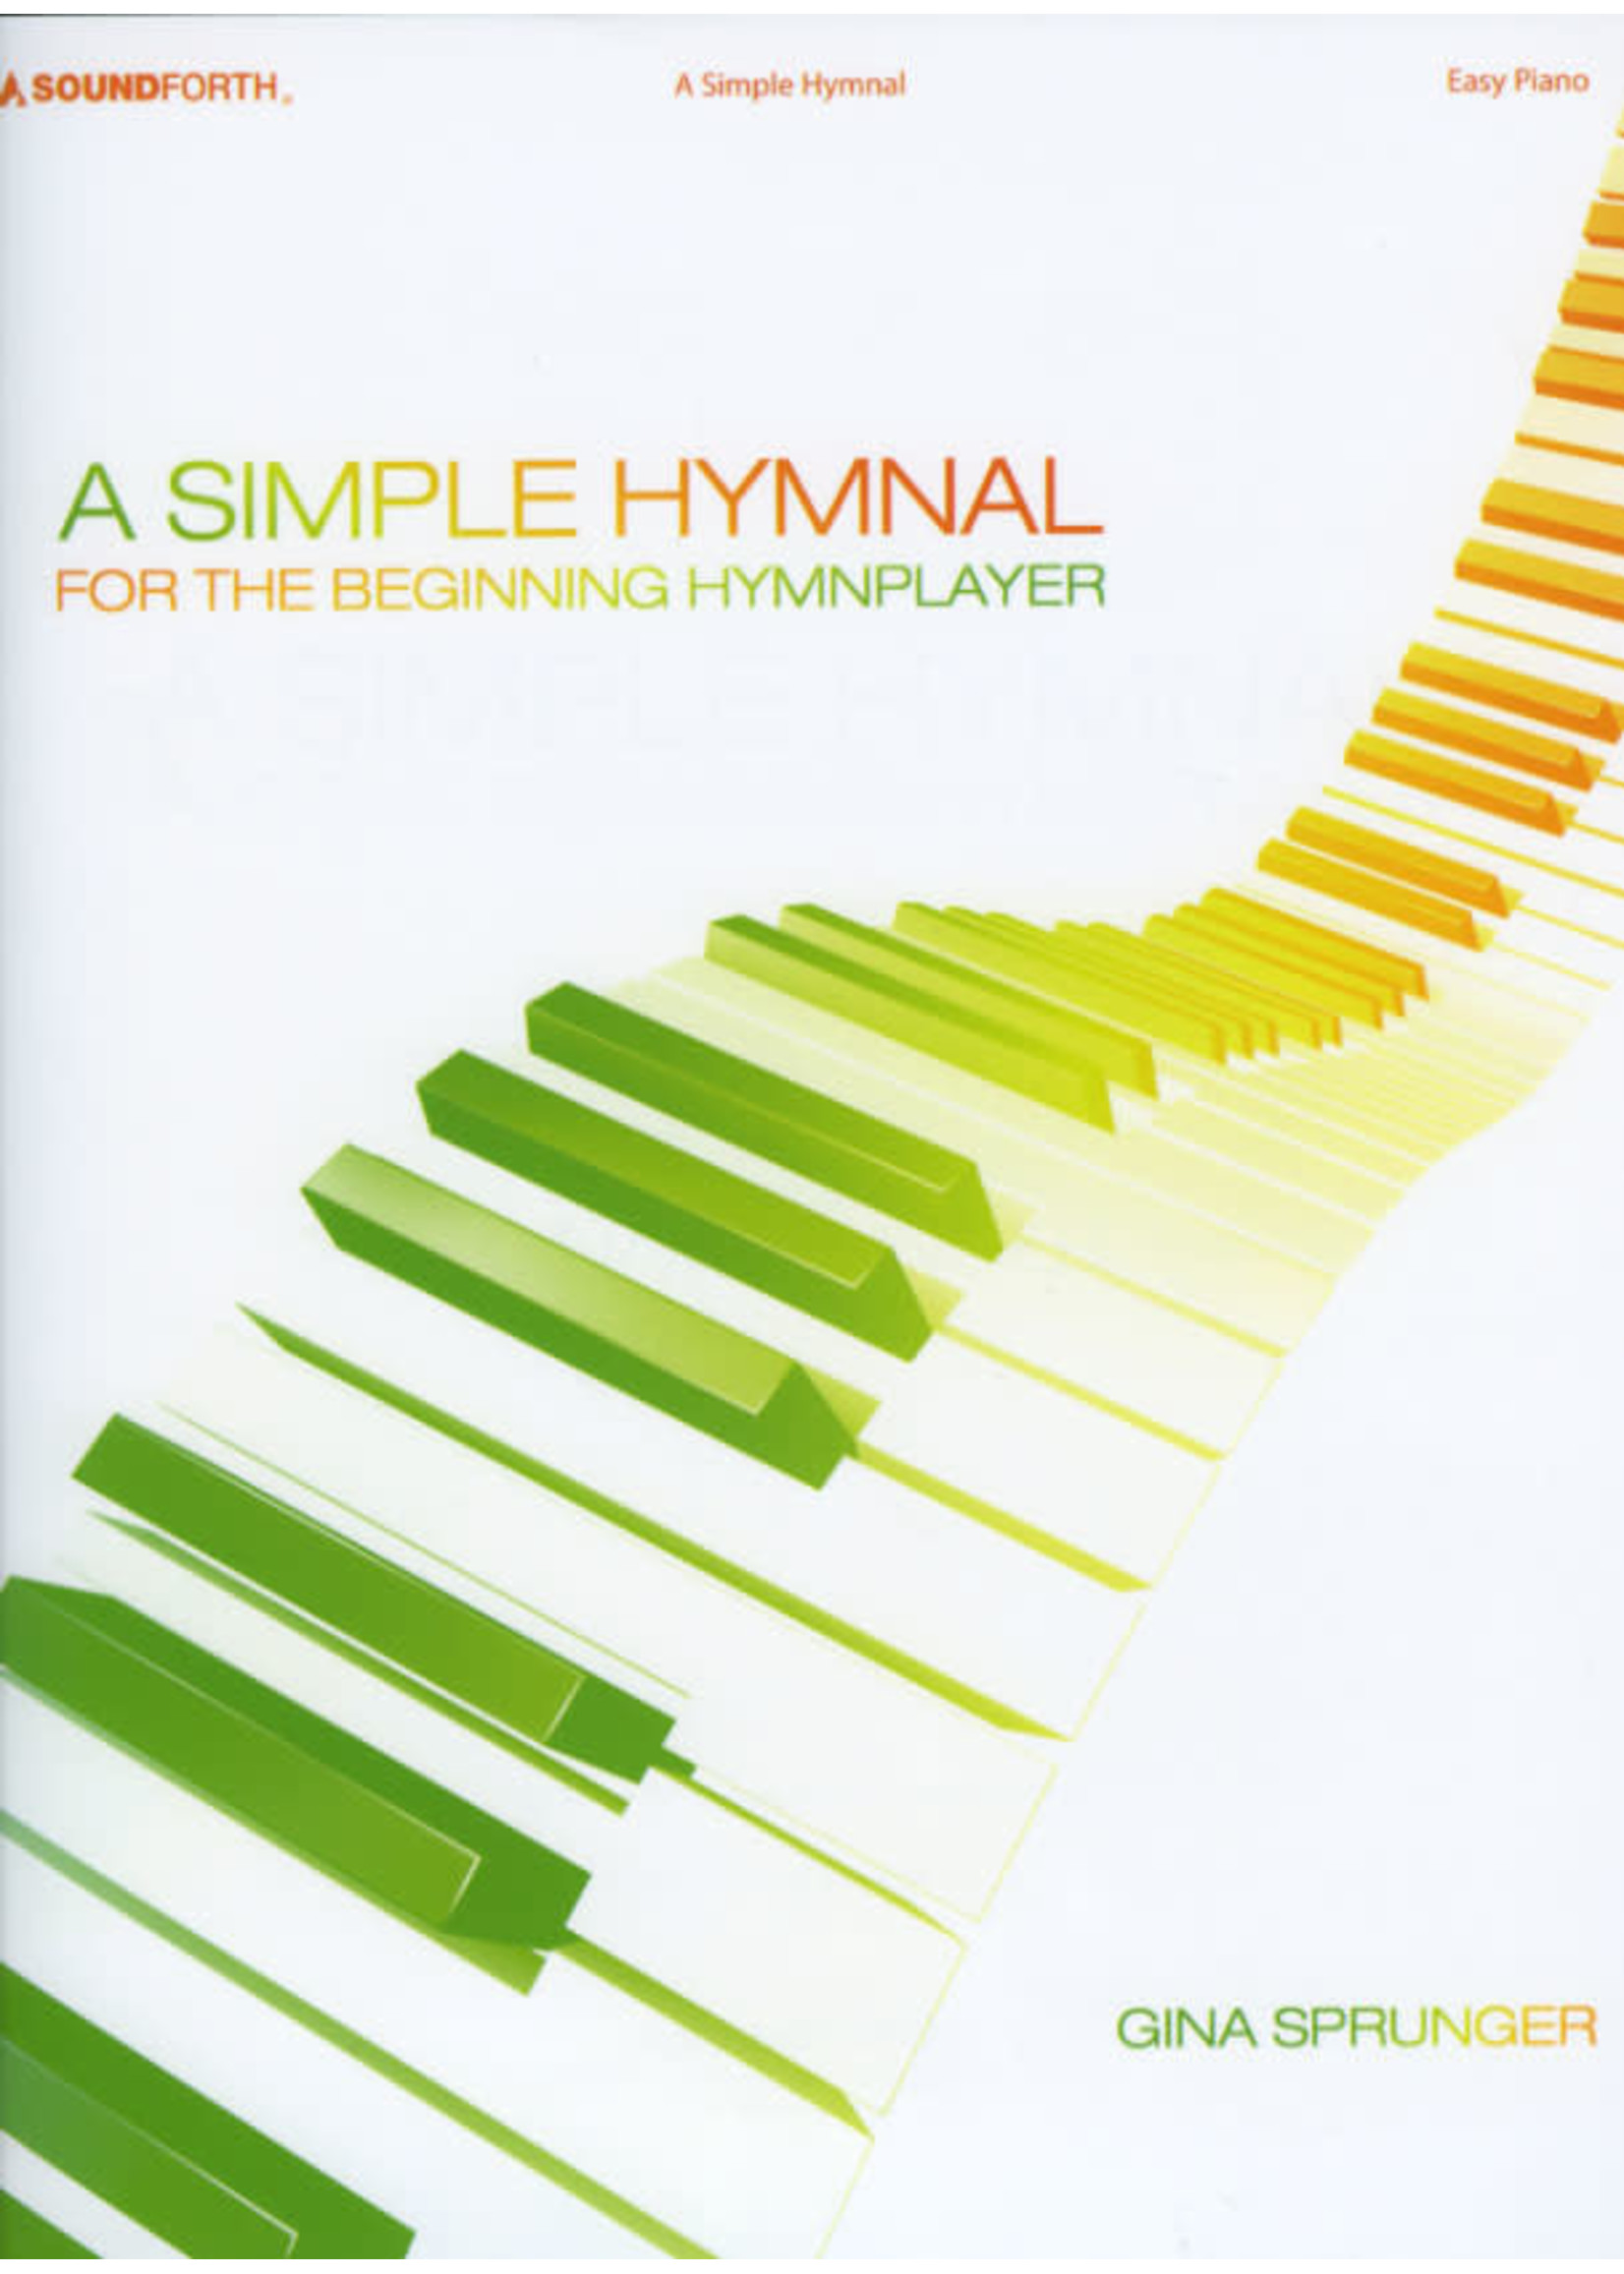 A Simple Hymnal (Easy Piano/Sprunger)